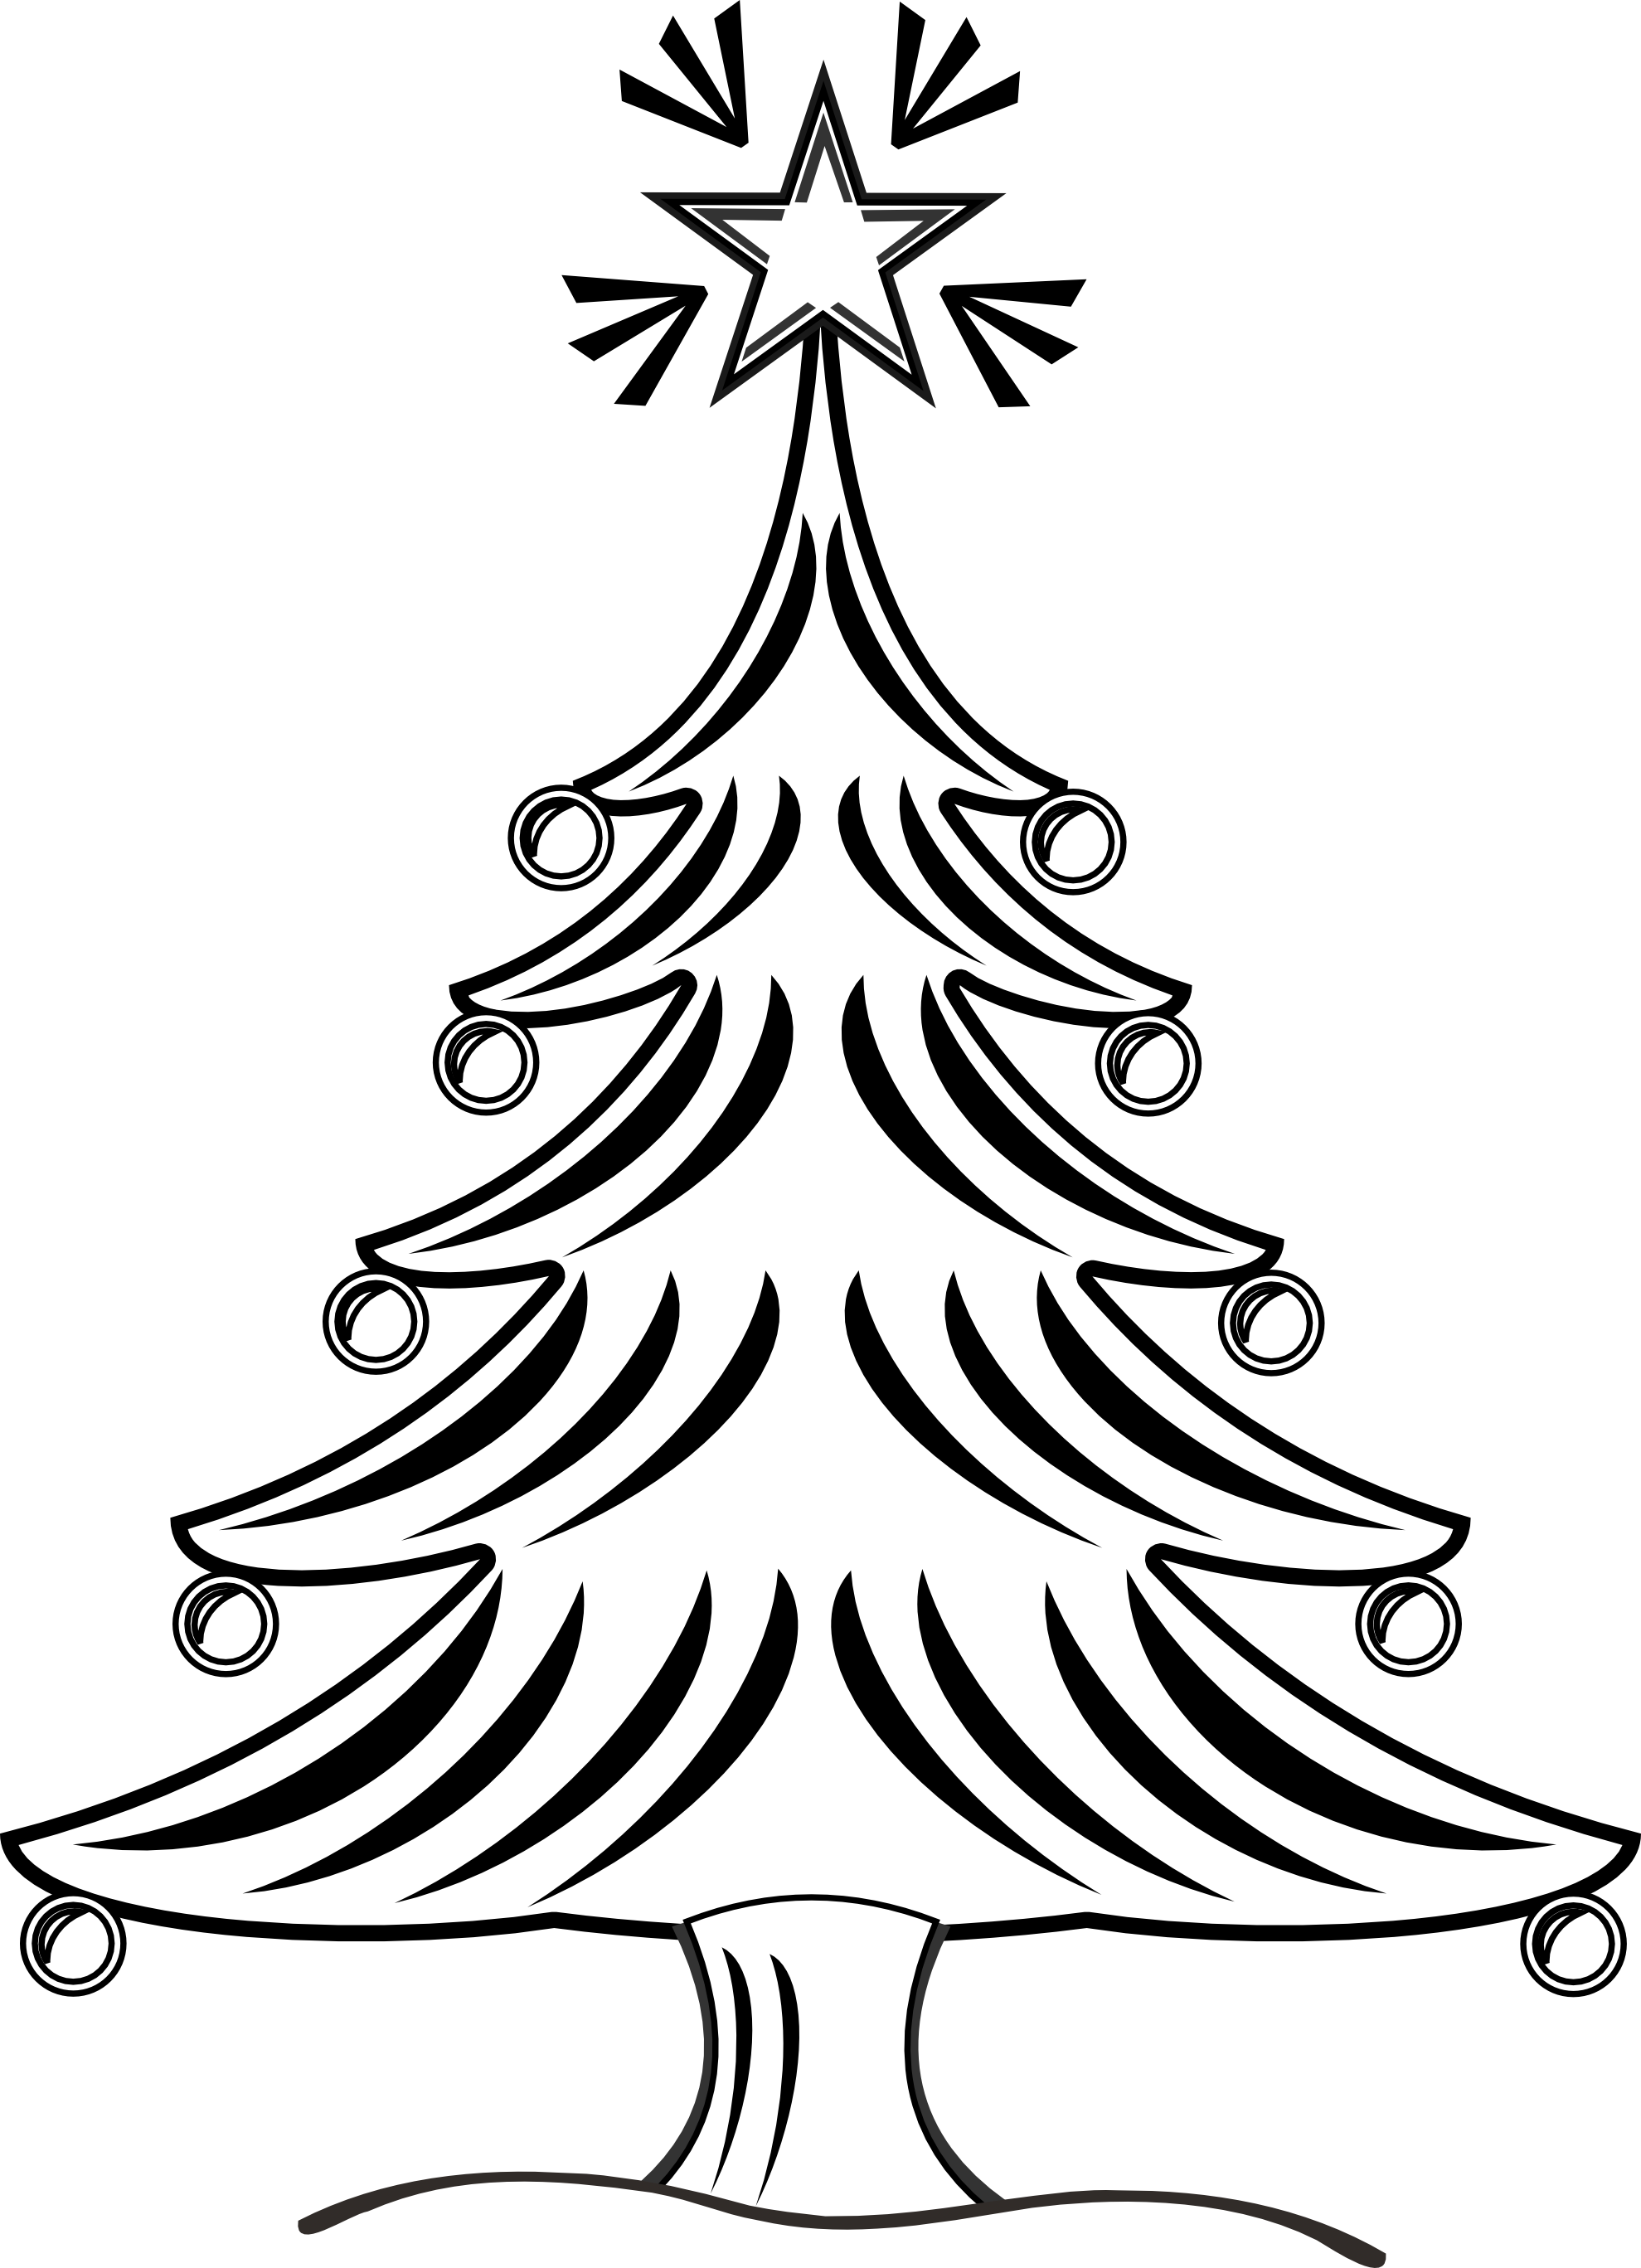 Tree Pictures Black And White - ClipArt Best